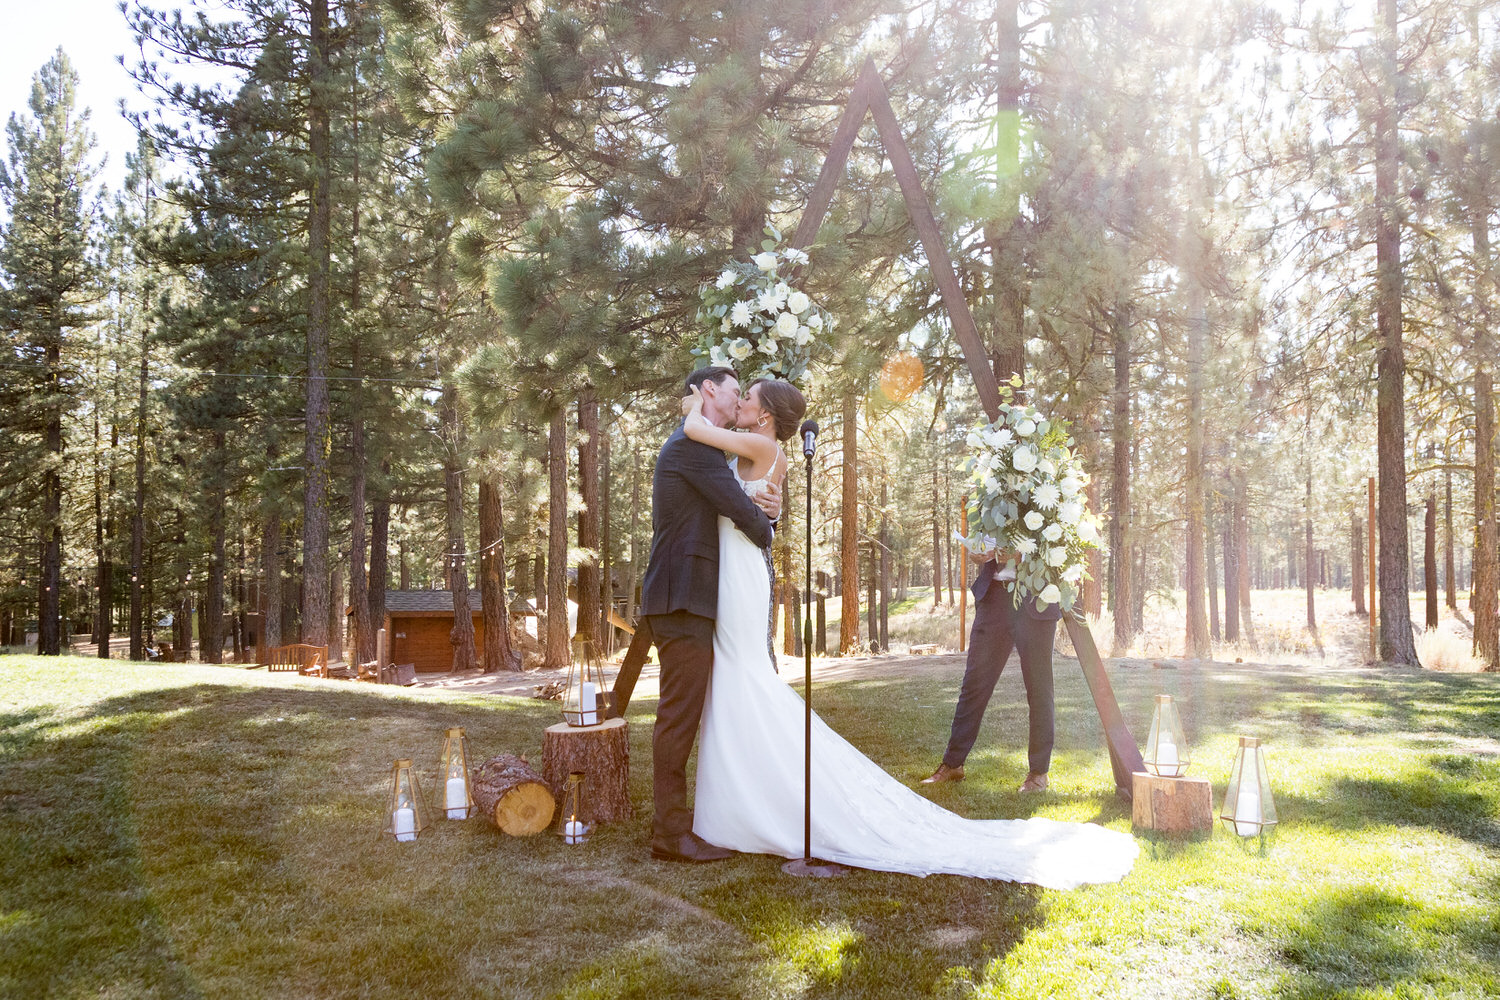 A rustic ceremony setup with logs and a wooden triangle arch.